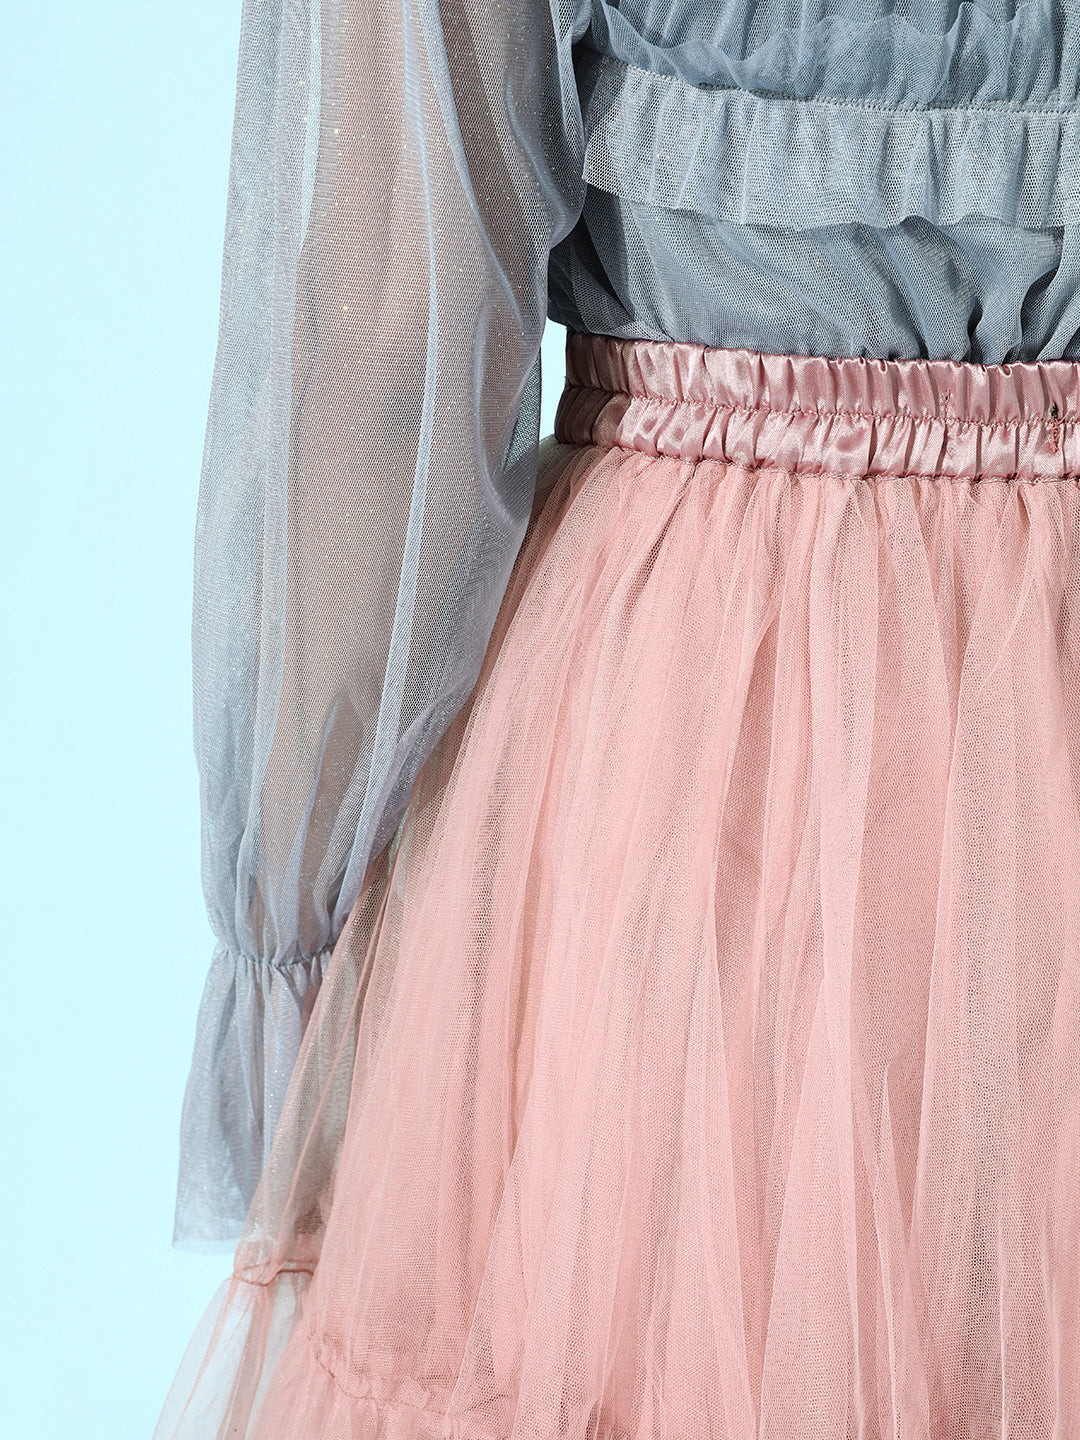 Dusty Pink Tulle Frilly Skirt